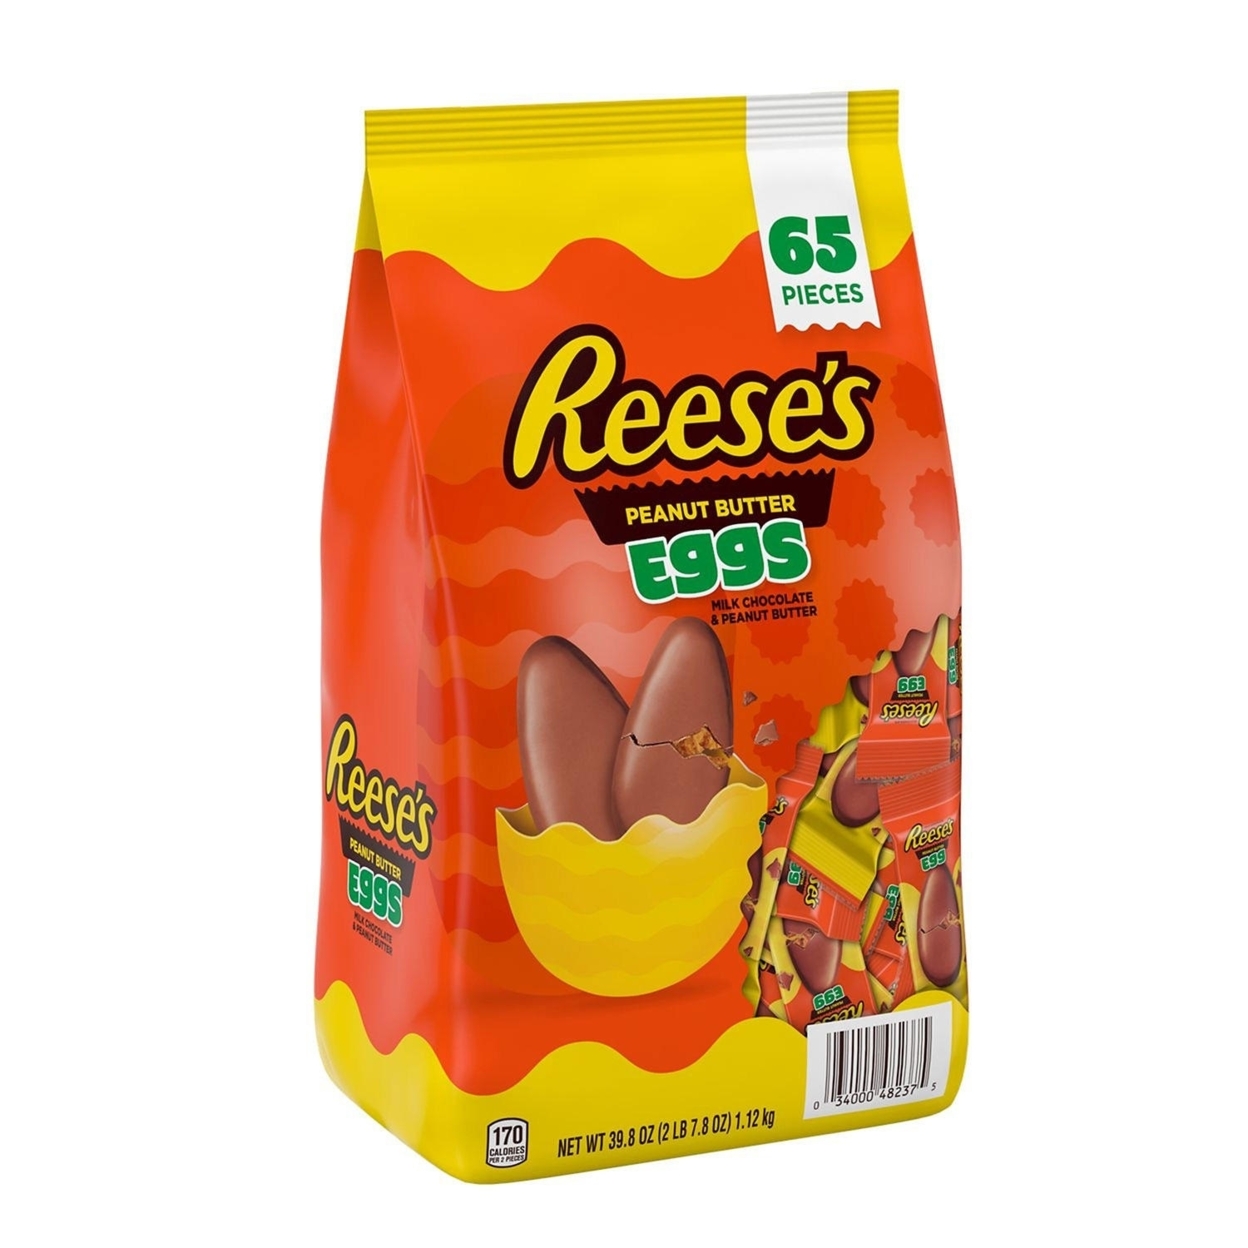 Reese's Milk Chocolate Peanut Butter Easter Eggs Candy, 39.8 Ounce (65 Pieces)